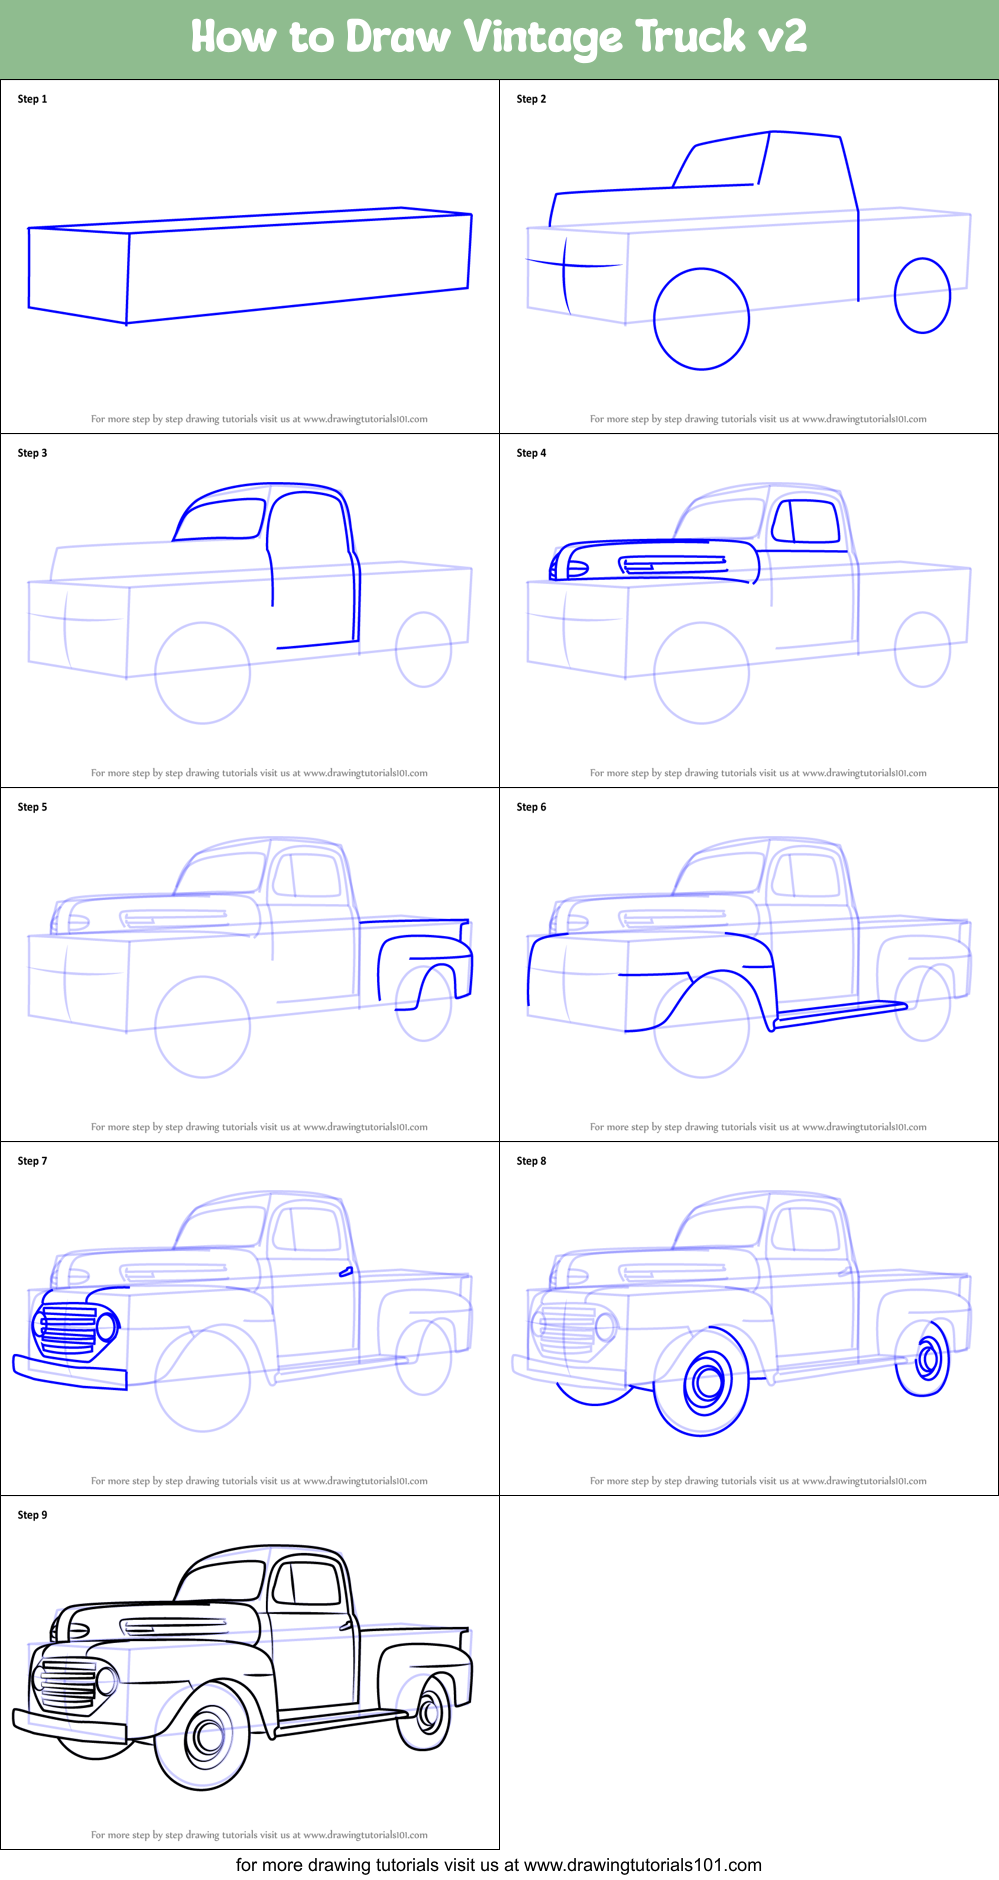 How to Draw Vintage Truck v2 printable step by step drawing sheet